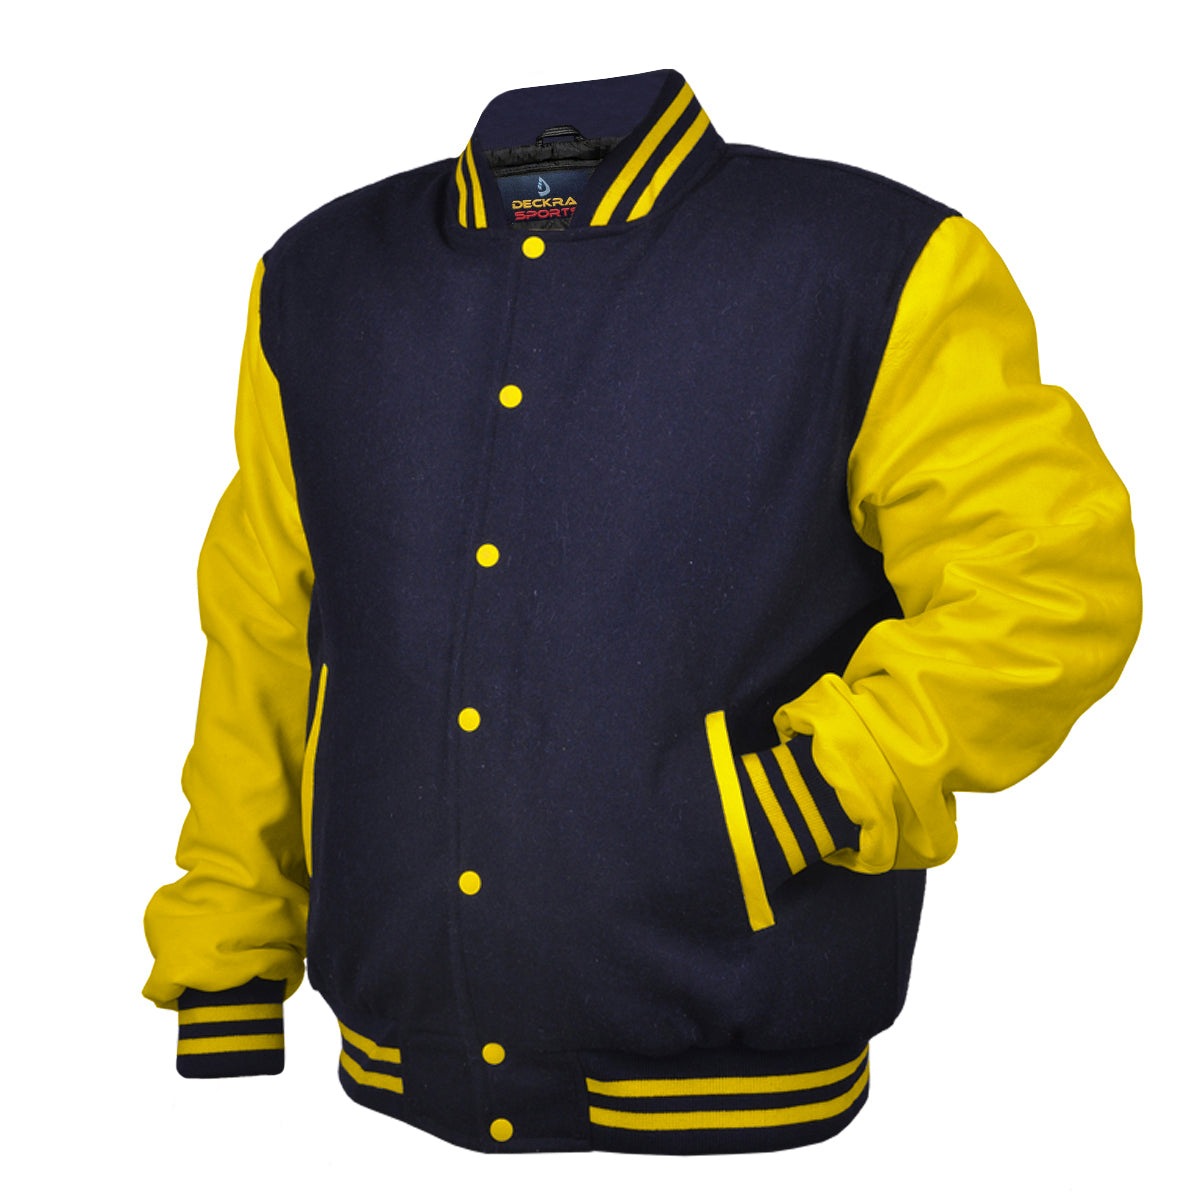 Mens Jacket Wool+Leather Navy Blue/Yellow